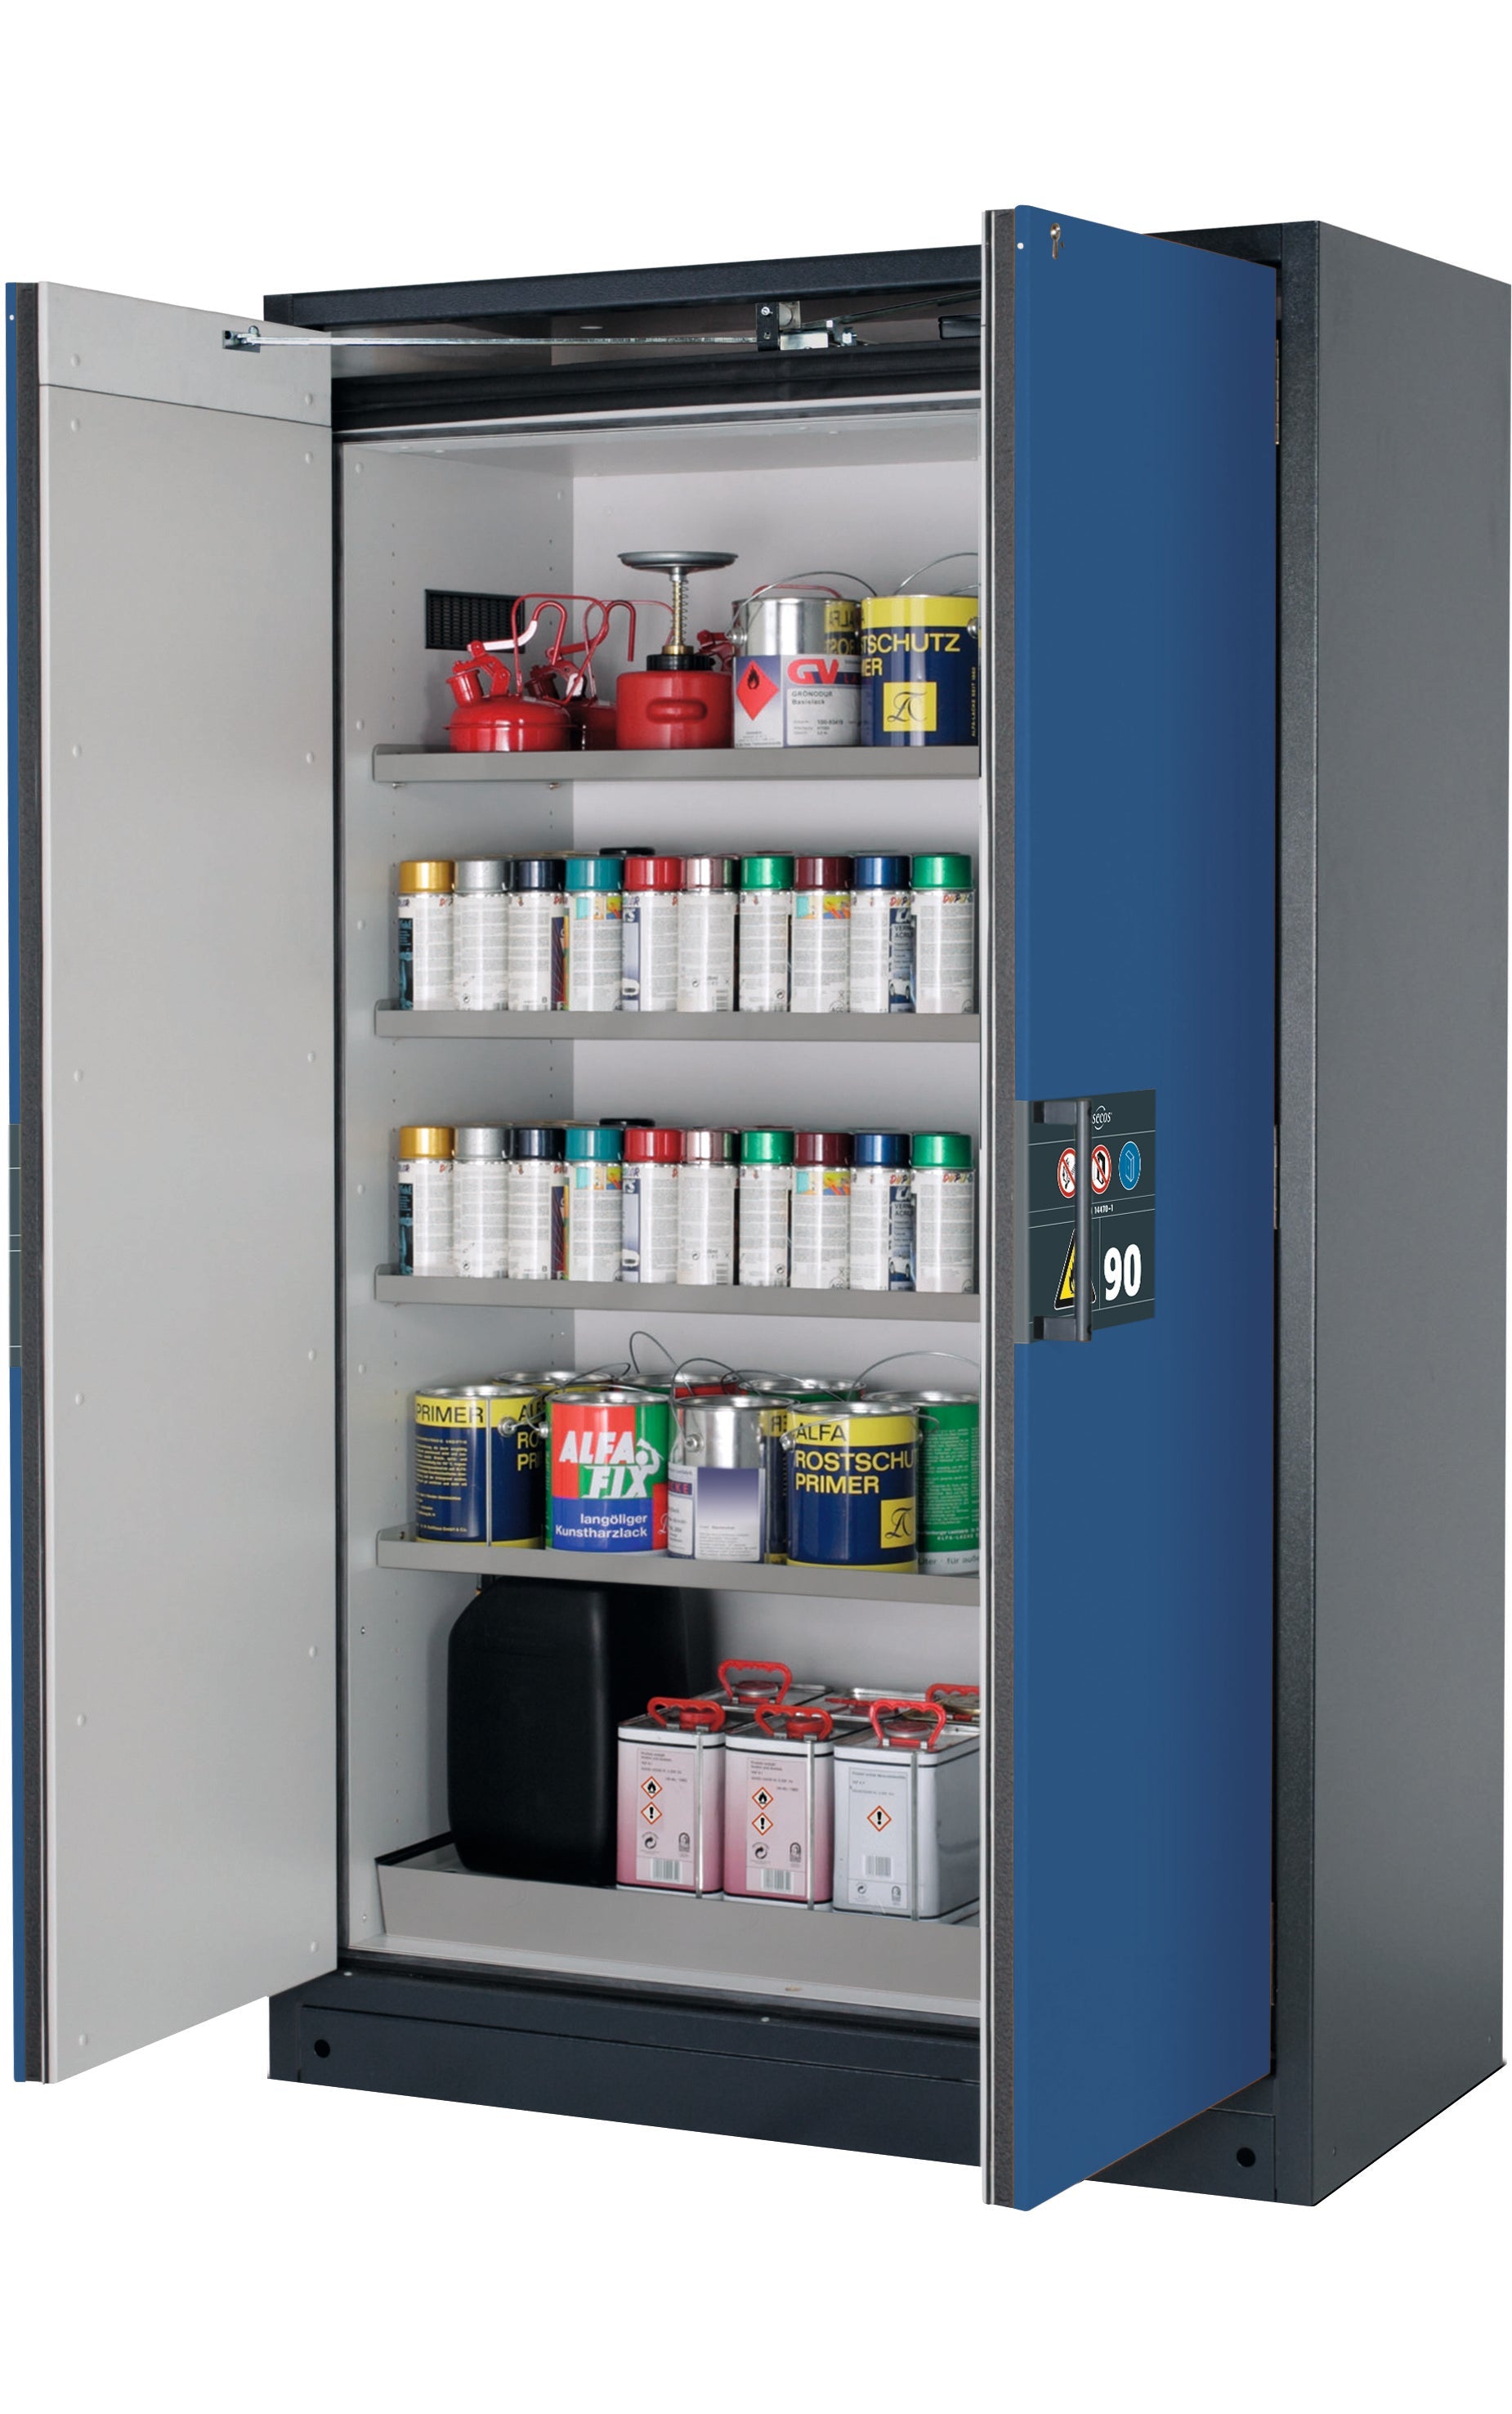 Type 90 safety storage cabinet Q-PEGASUS-90 model Q90.195.120.WDAC in gentian blue RAL 5010 with 4x shelf standard (stainless steel 1.4301),